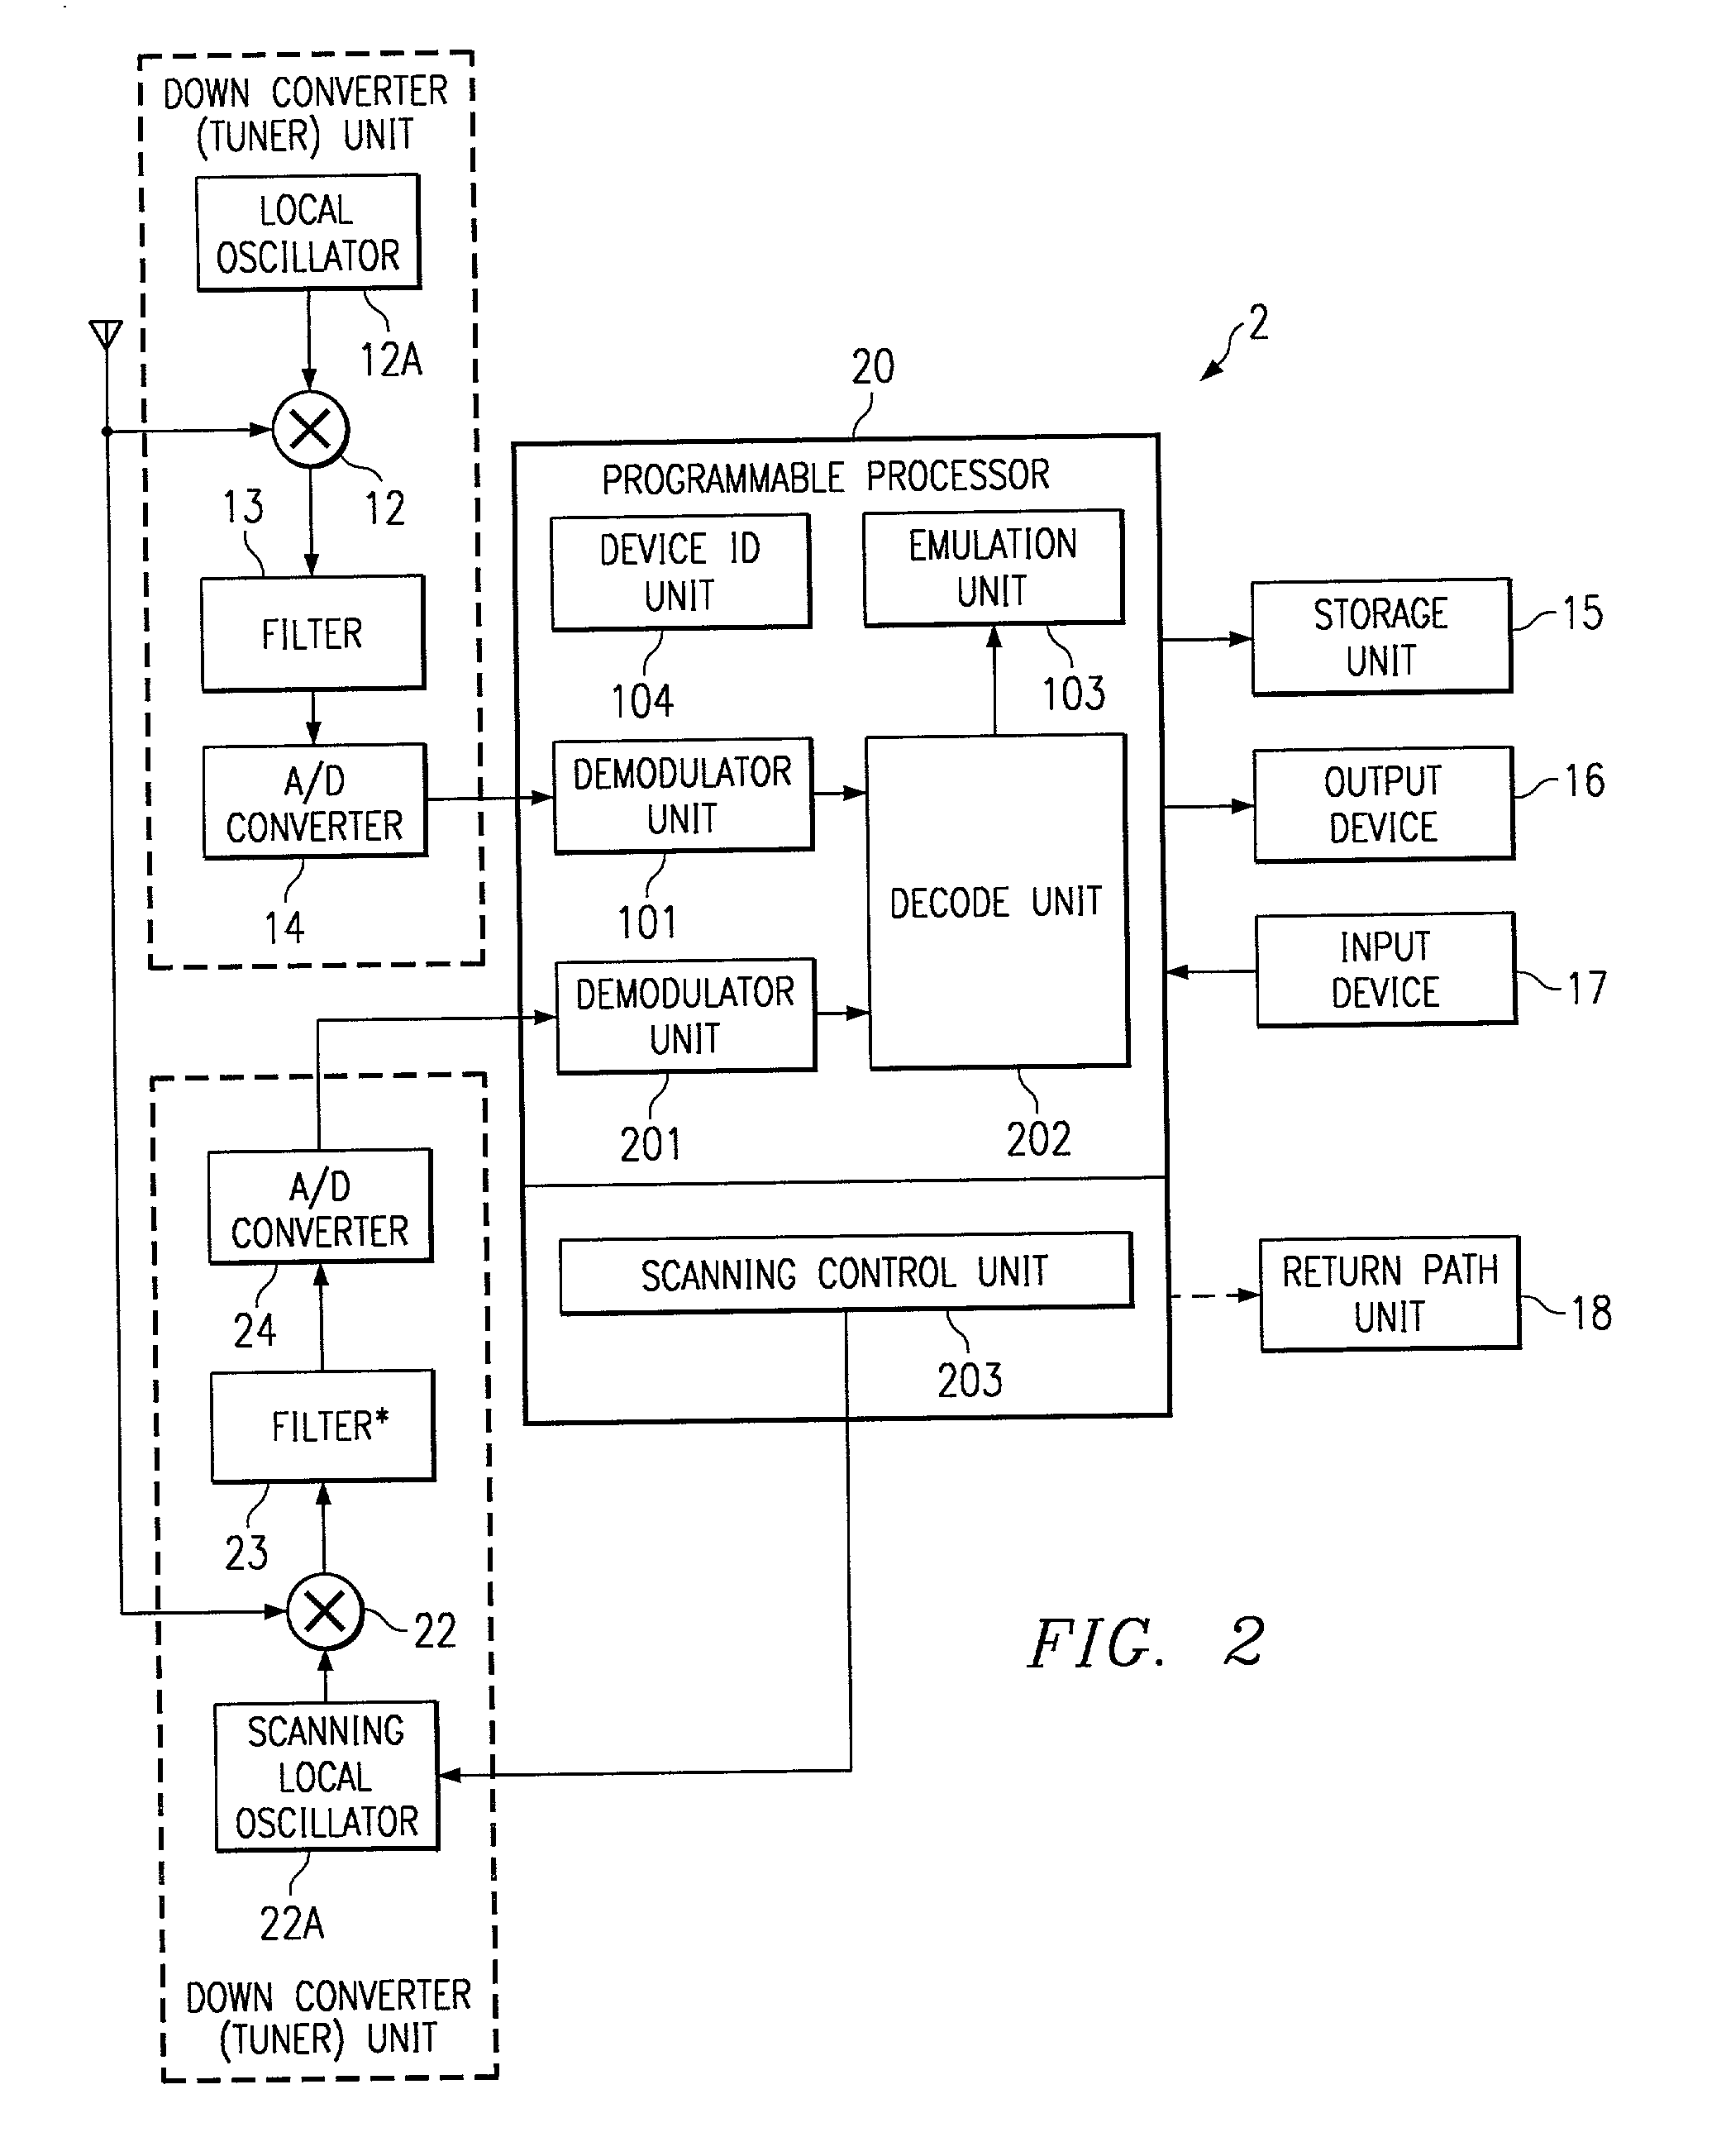 Apparatus and method for the transparent upgrading of technology and applications in digital radio systems using programmable transmitters and receivers